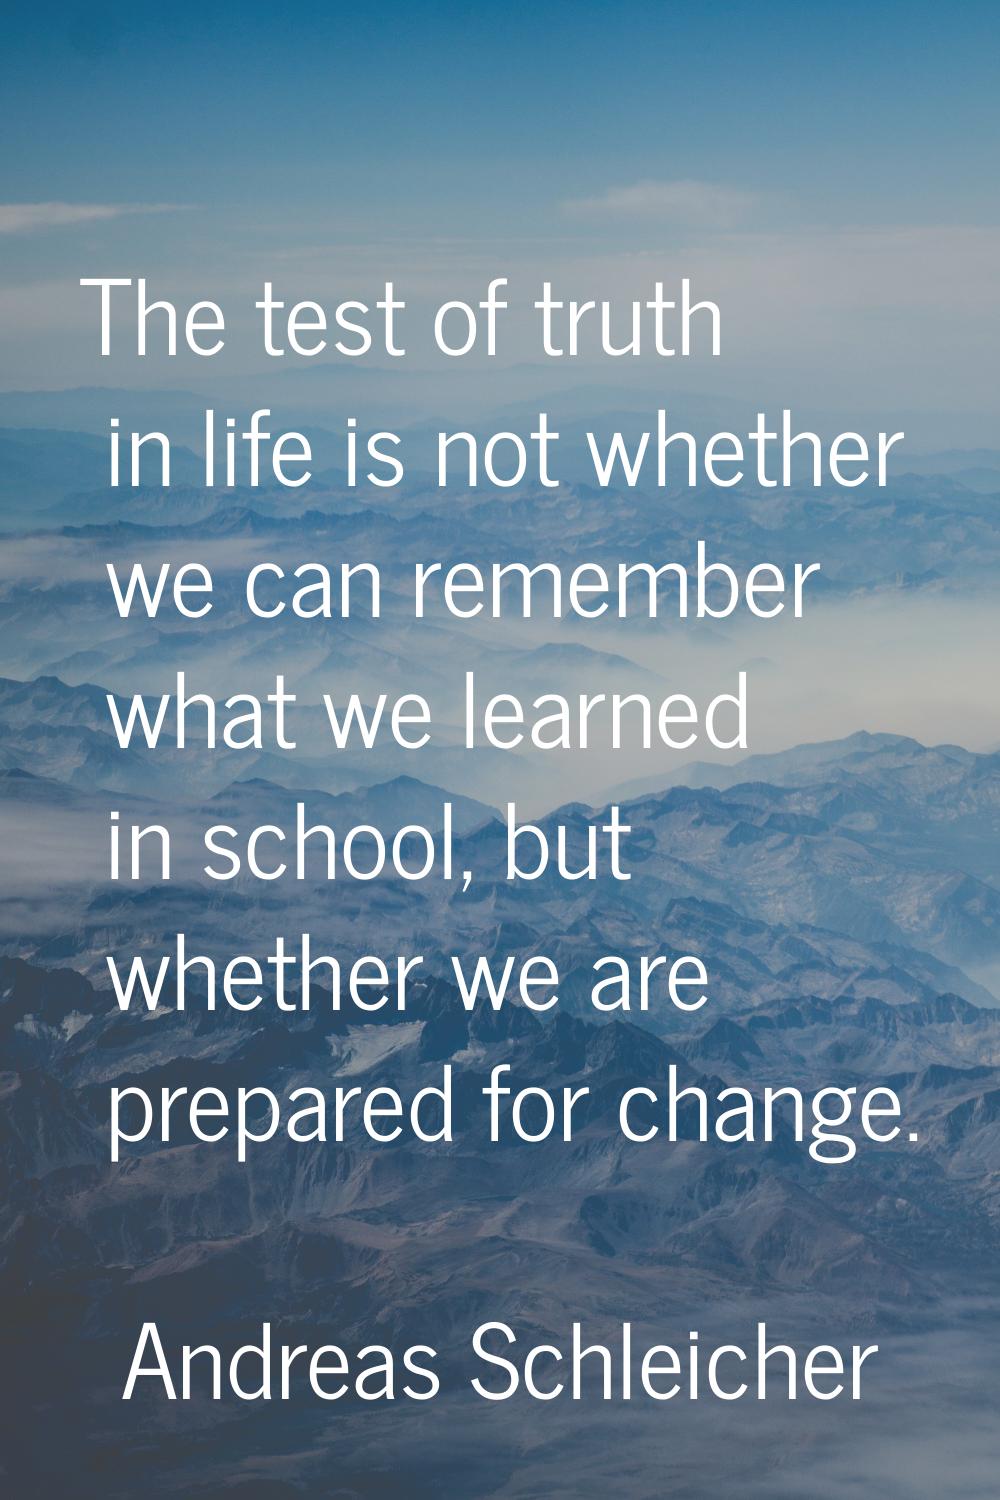 The test of truth in life is not whether we can remember what we learned in school, but whether we 